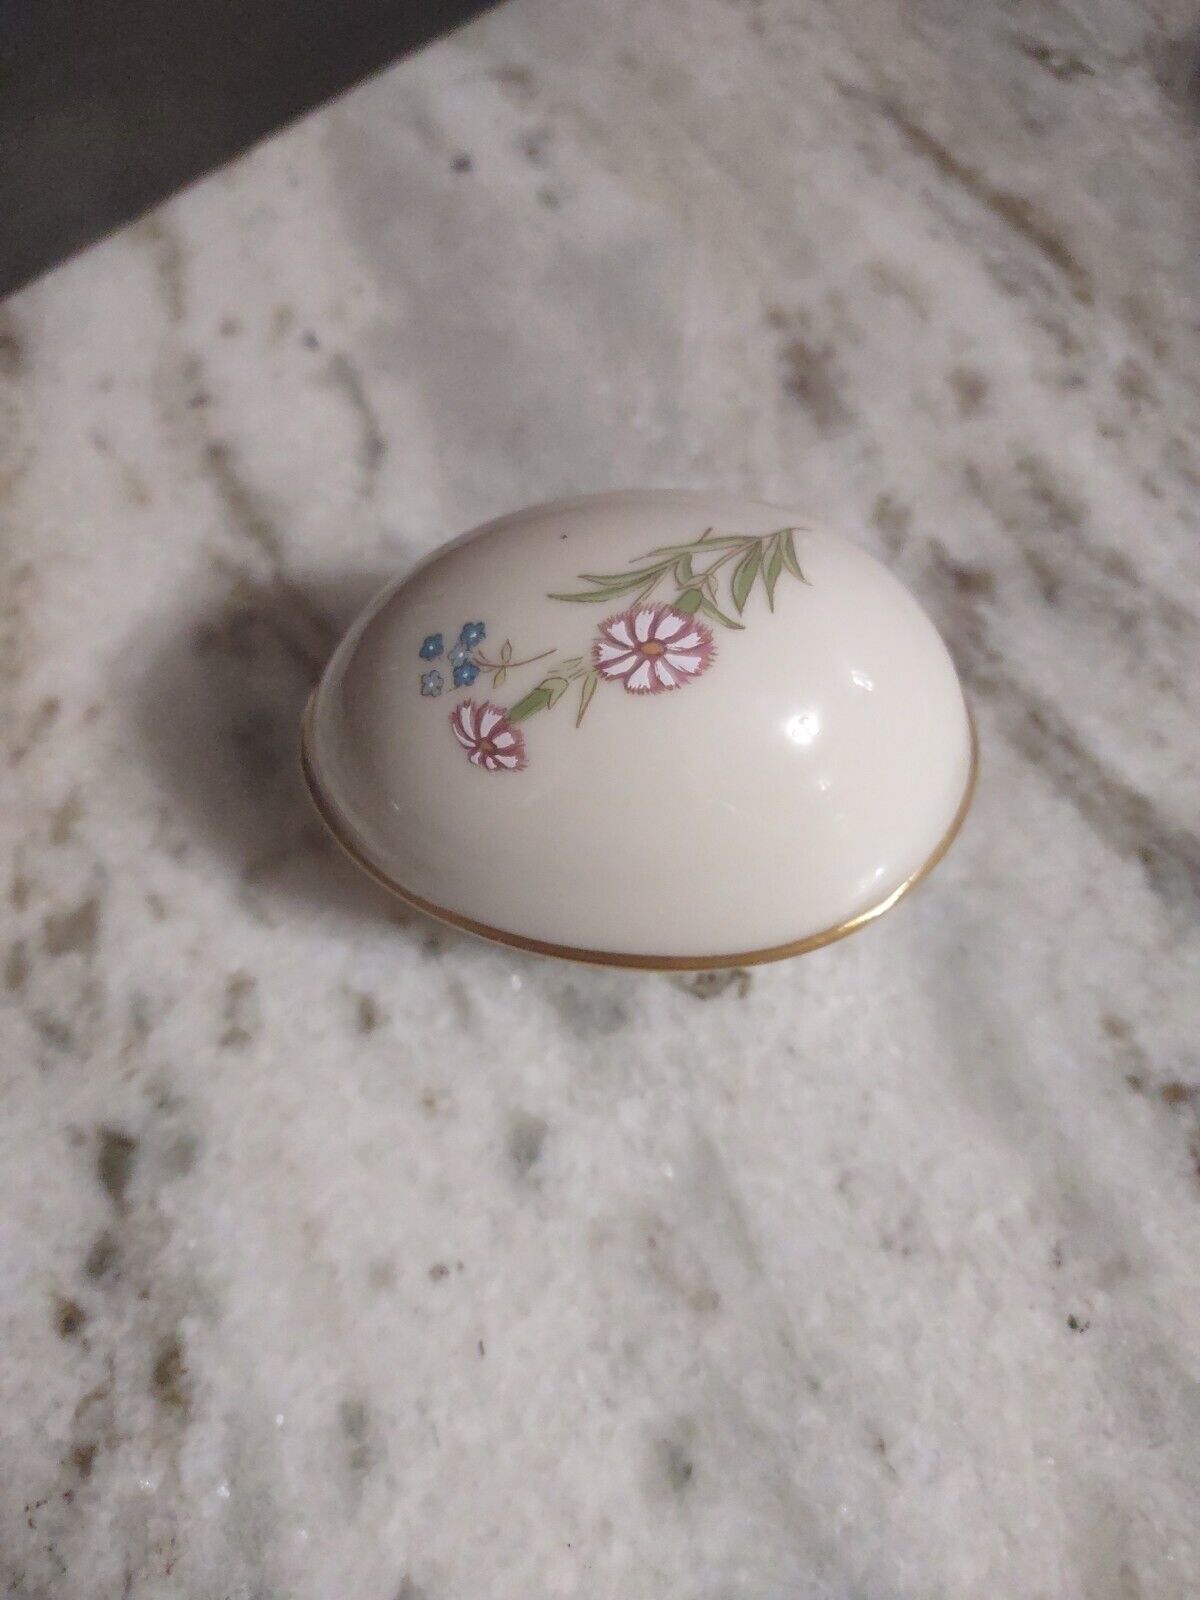 Rare LENOX EASTER EGG 2 PIECE TRINKET BOX WITH HAND PAINTED FLOWERS Vintage 